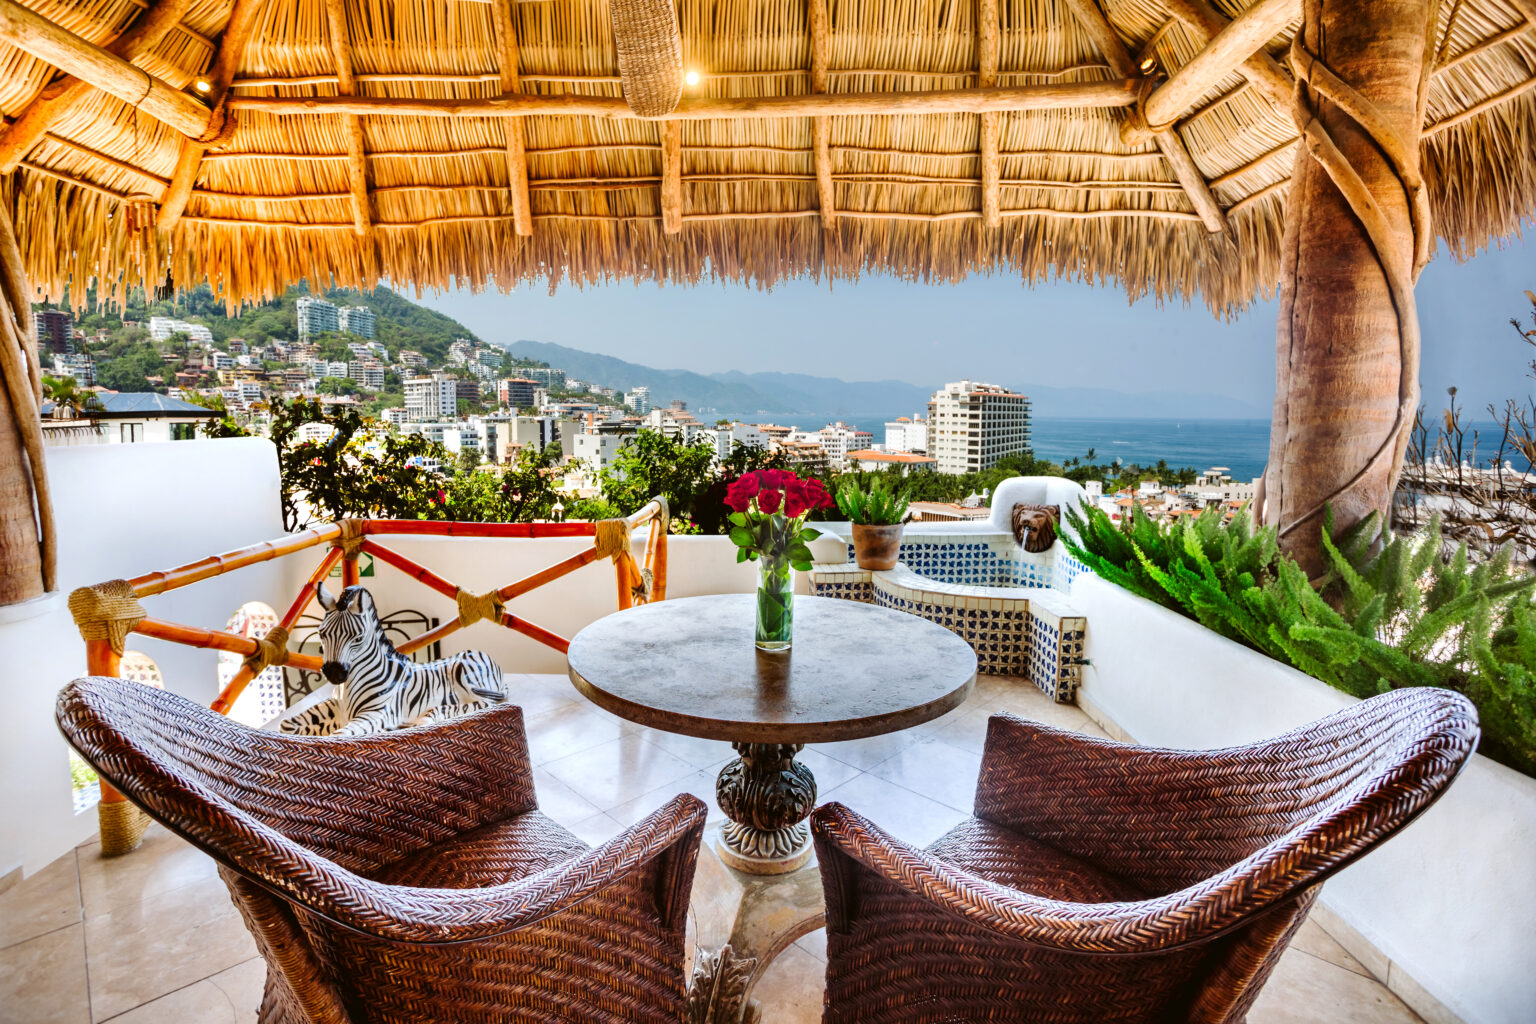 Celestial Suite's private balcony with beautiful view of Banderas Bay